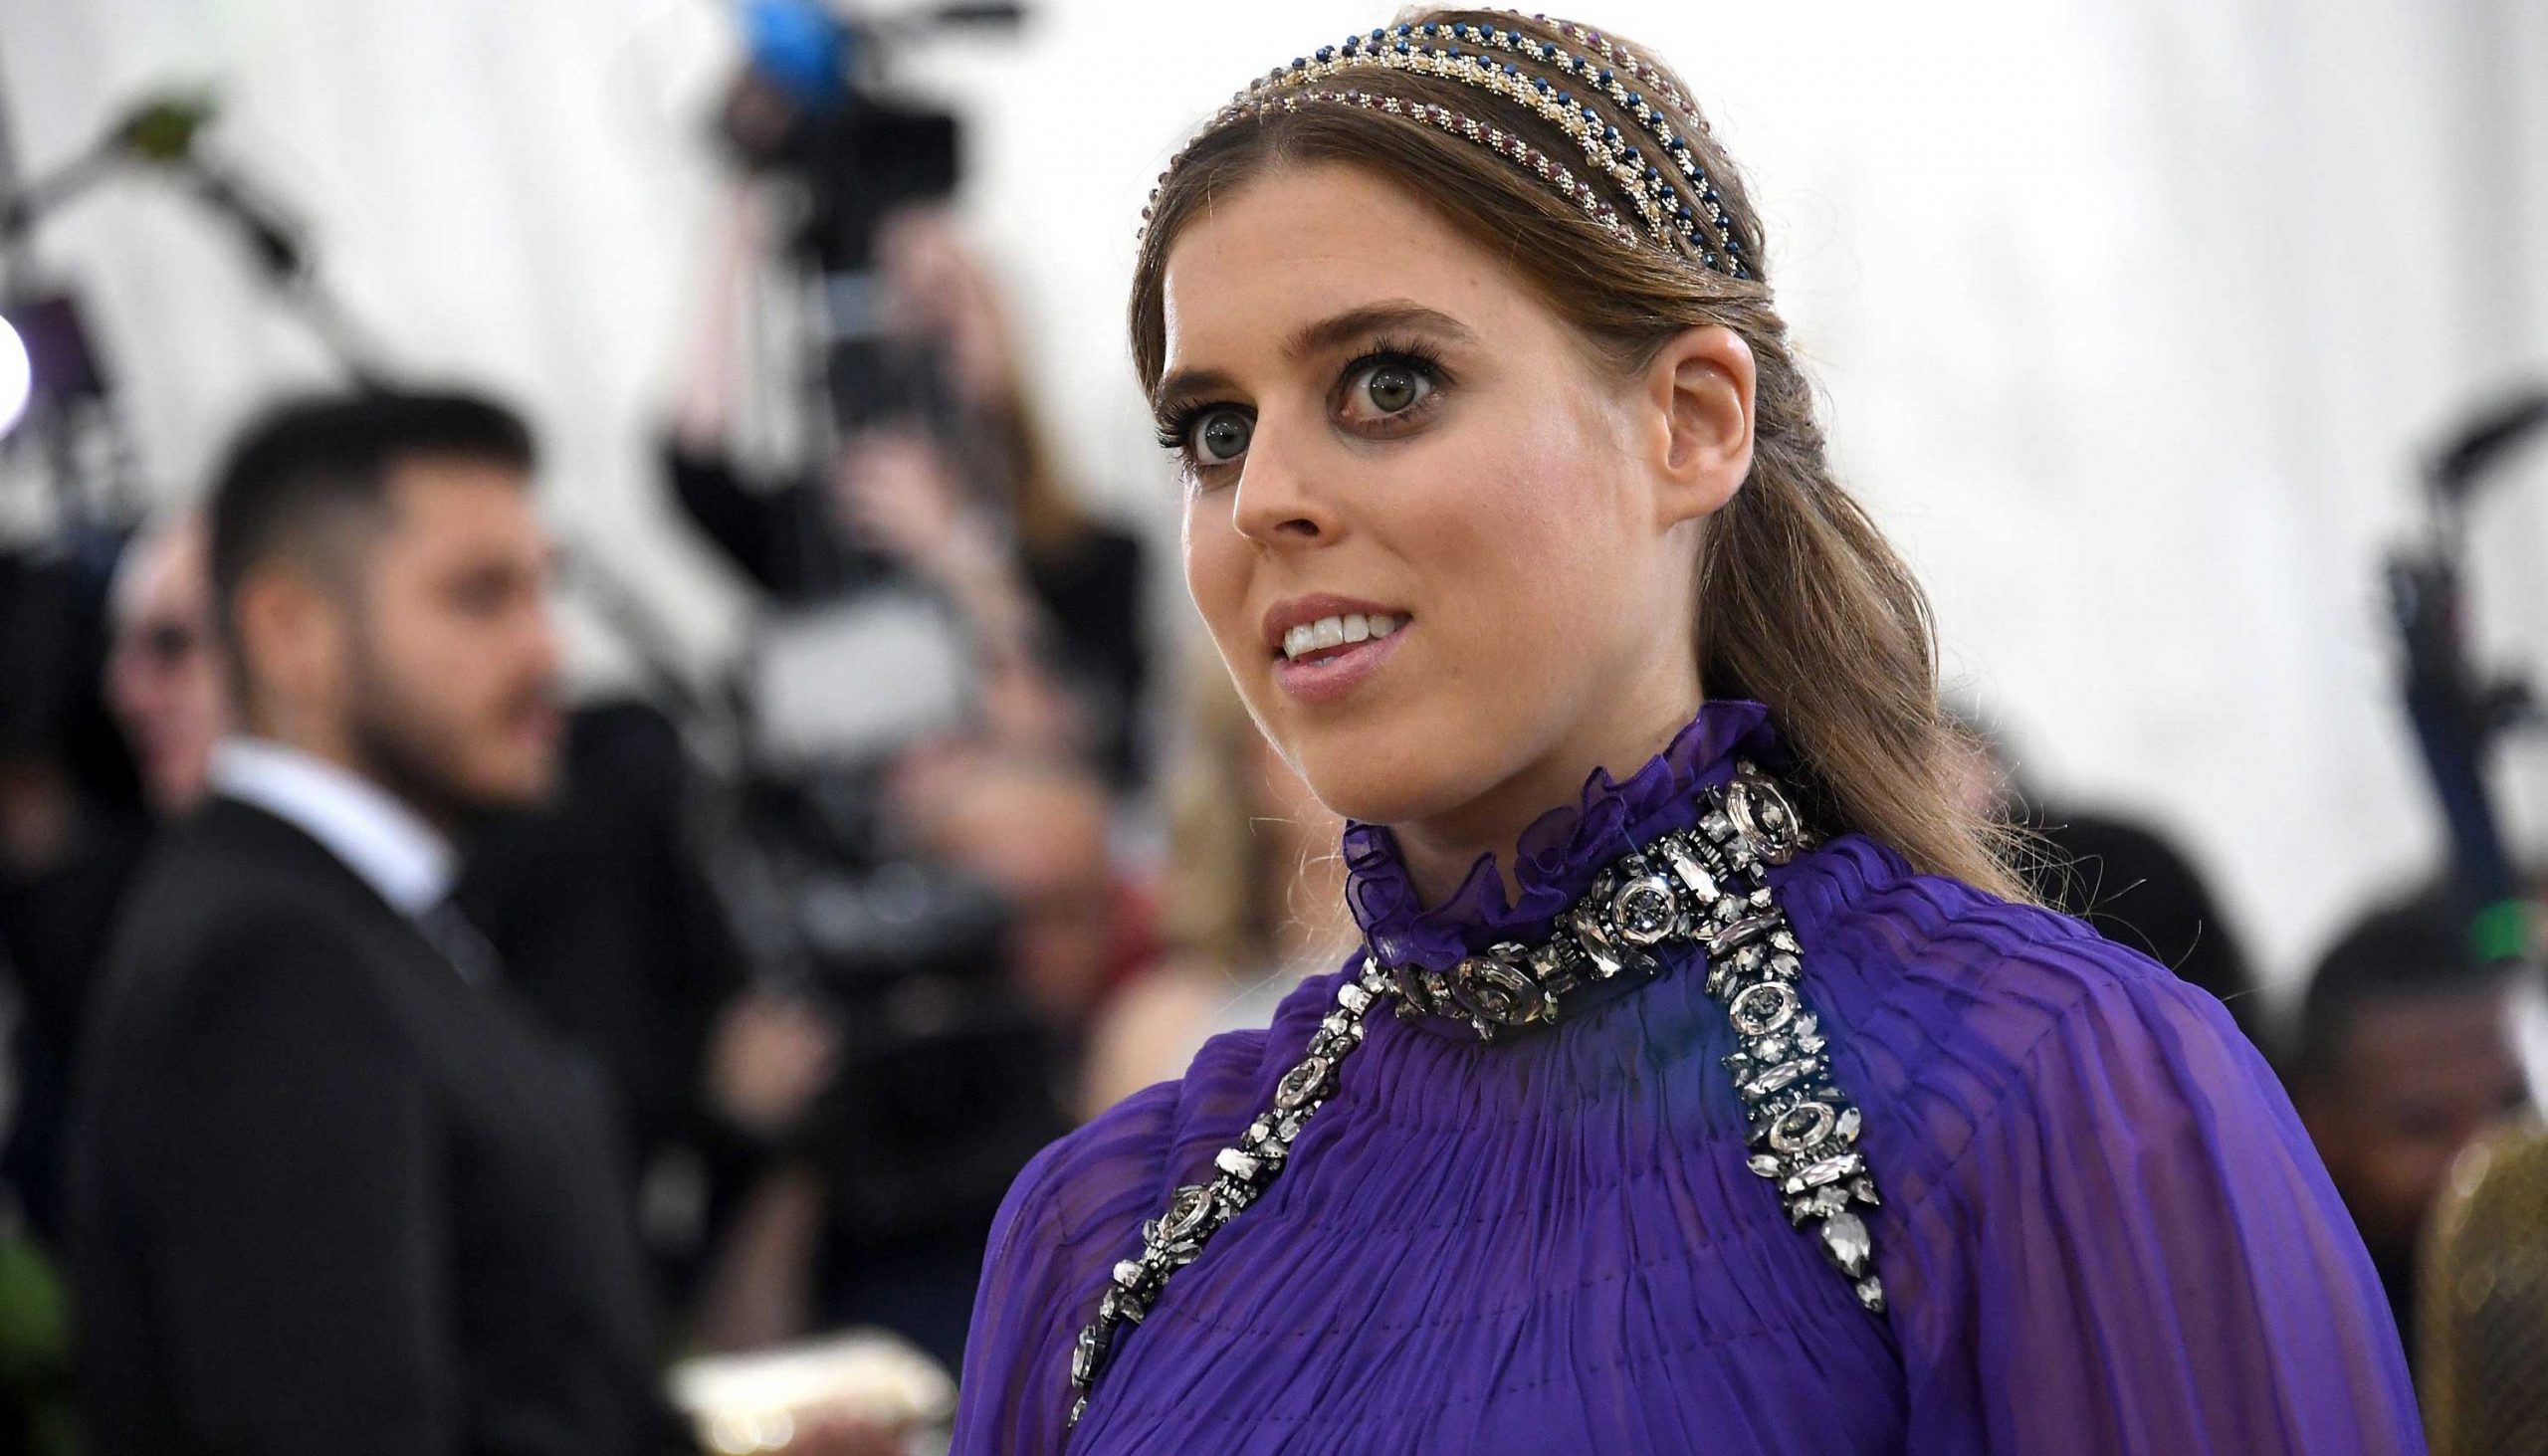 Princess-Beatrice-on-challenging-moments-with-dyslexia-Why-am-I-not-like-others-rapidnews-dailyrapid-dailyrapidnews